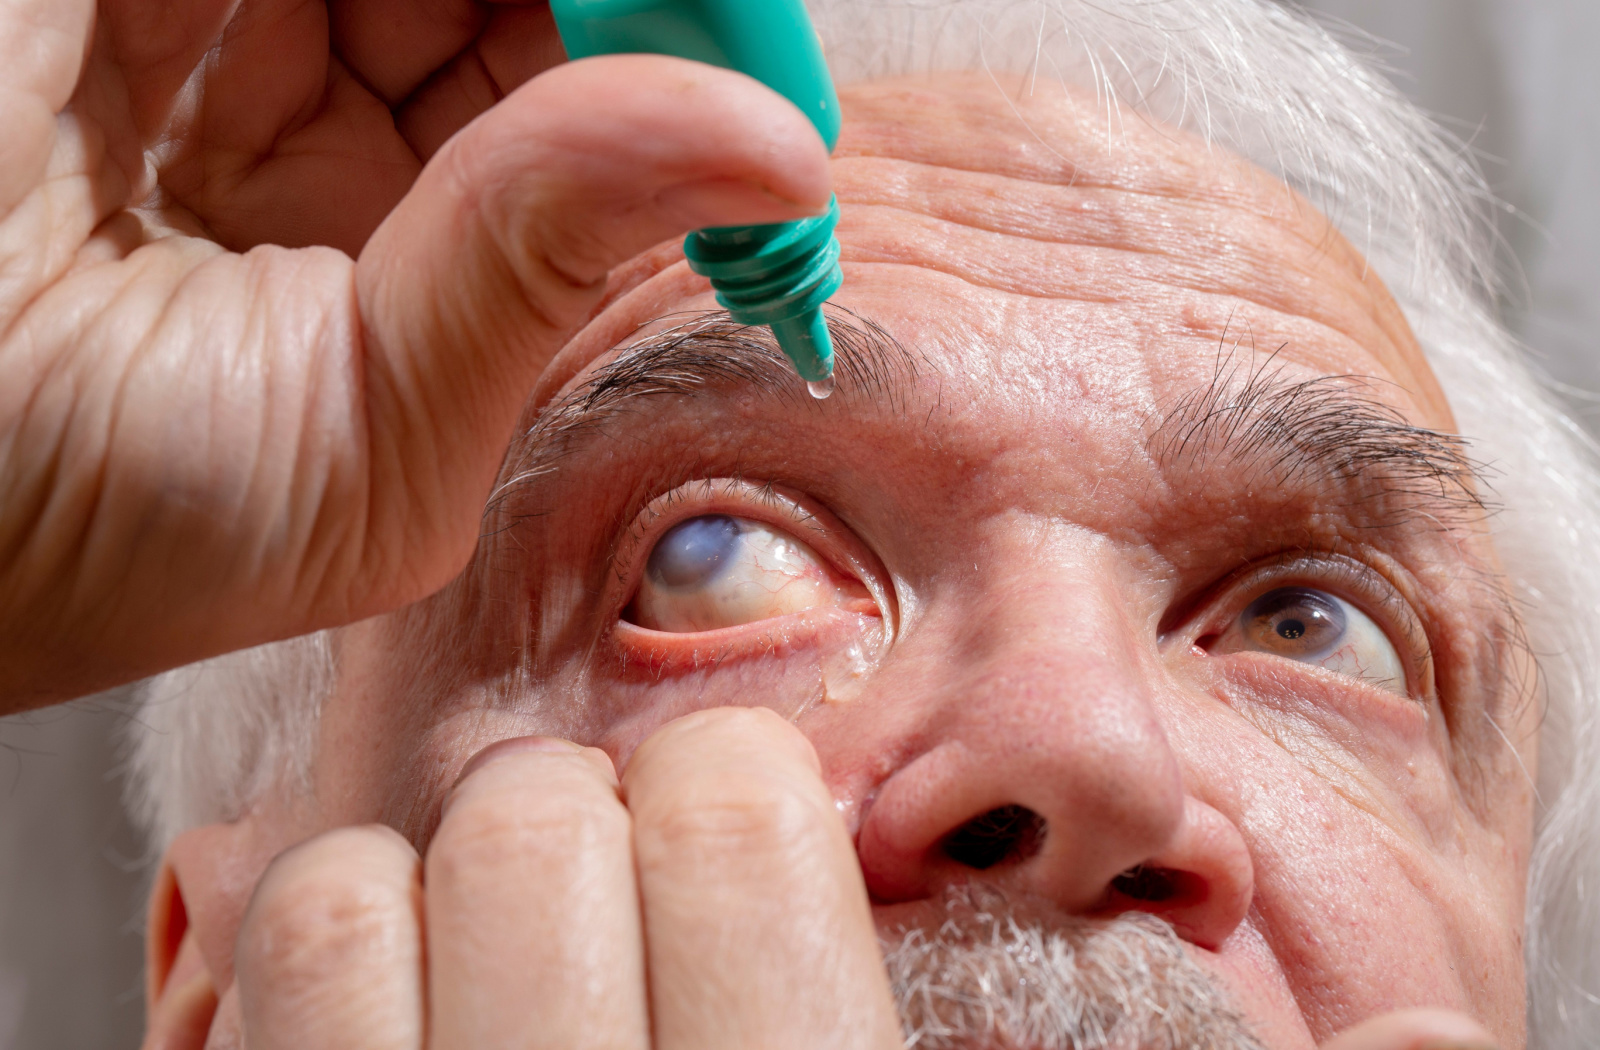 An older man carefully administers eye drops to alleviate symptoms of his cataract, seeking relief and maintaining his ocular health.